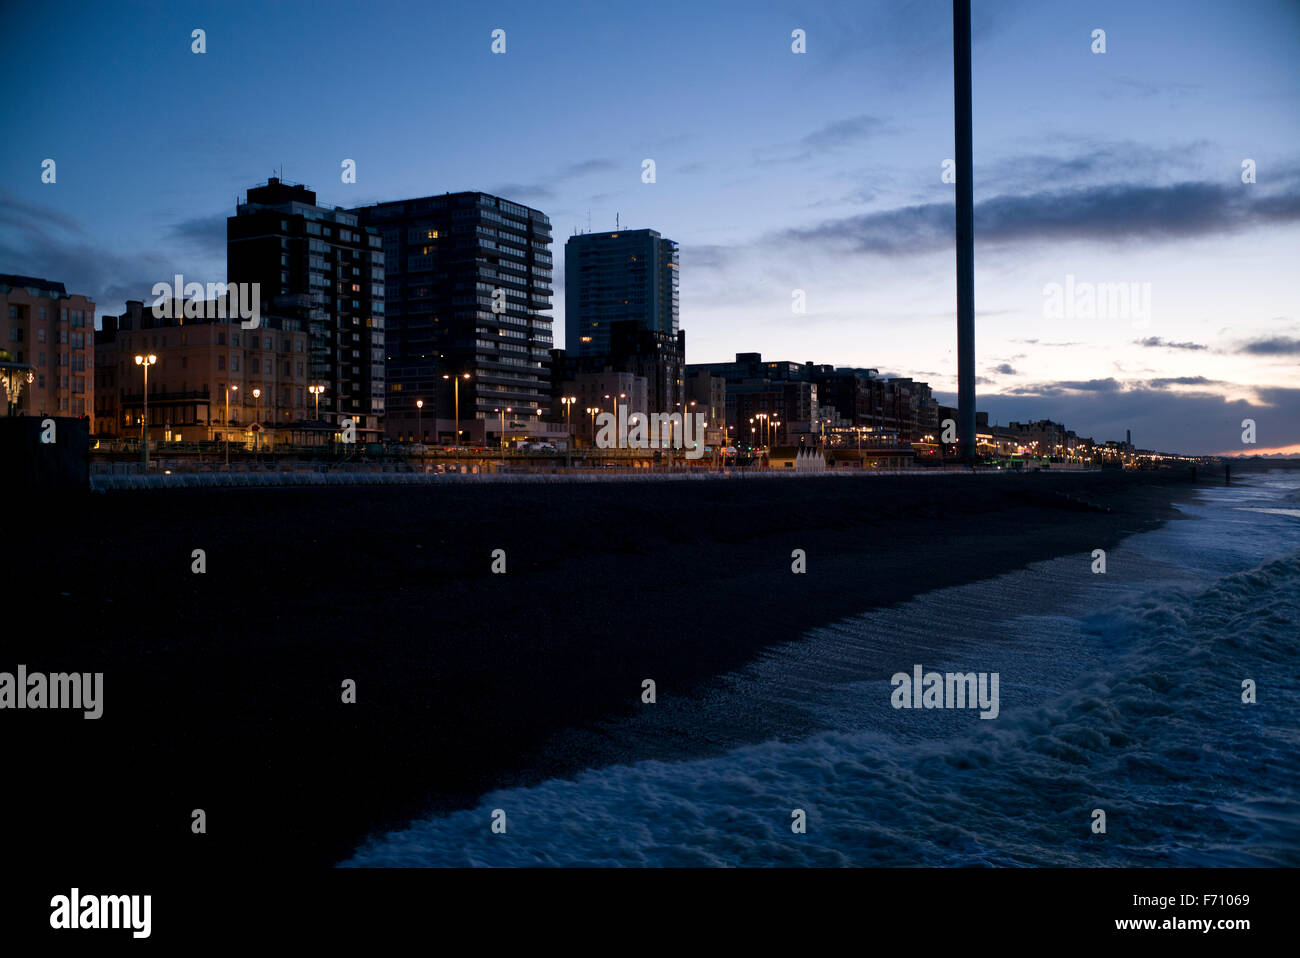 Brighton seafront and hotels, before sunrise, streetlights and i360 viewing tower Stock Photo